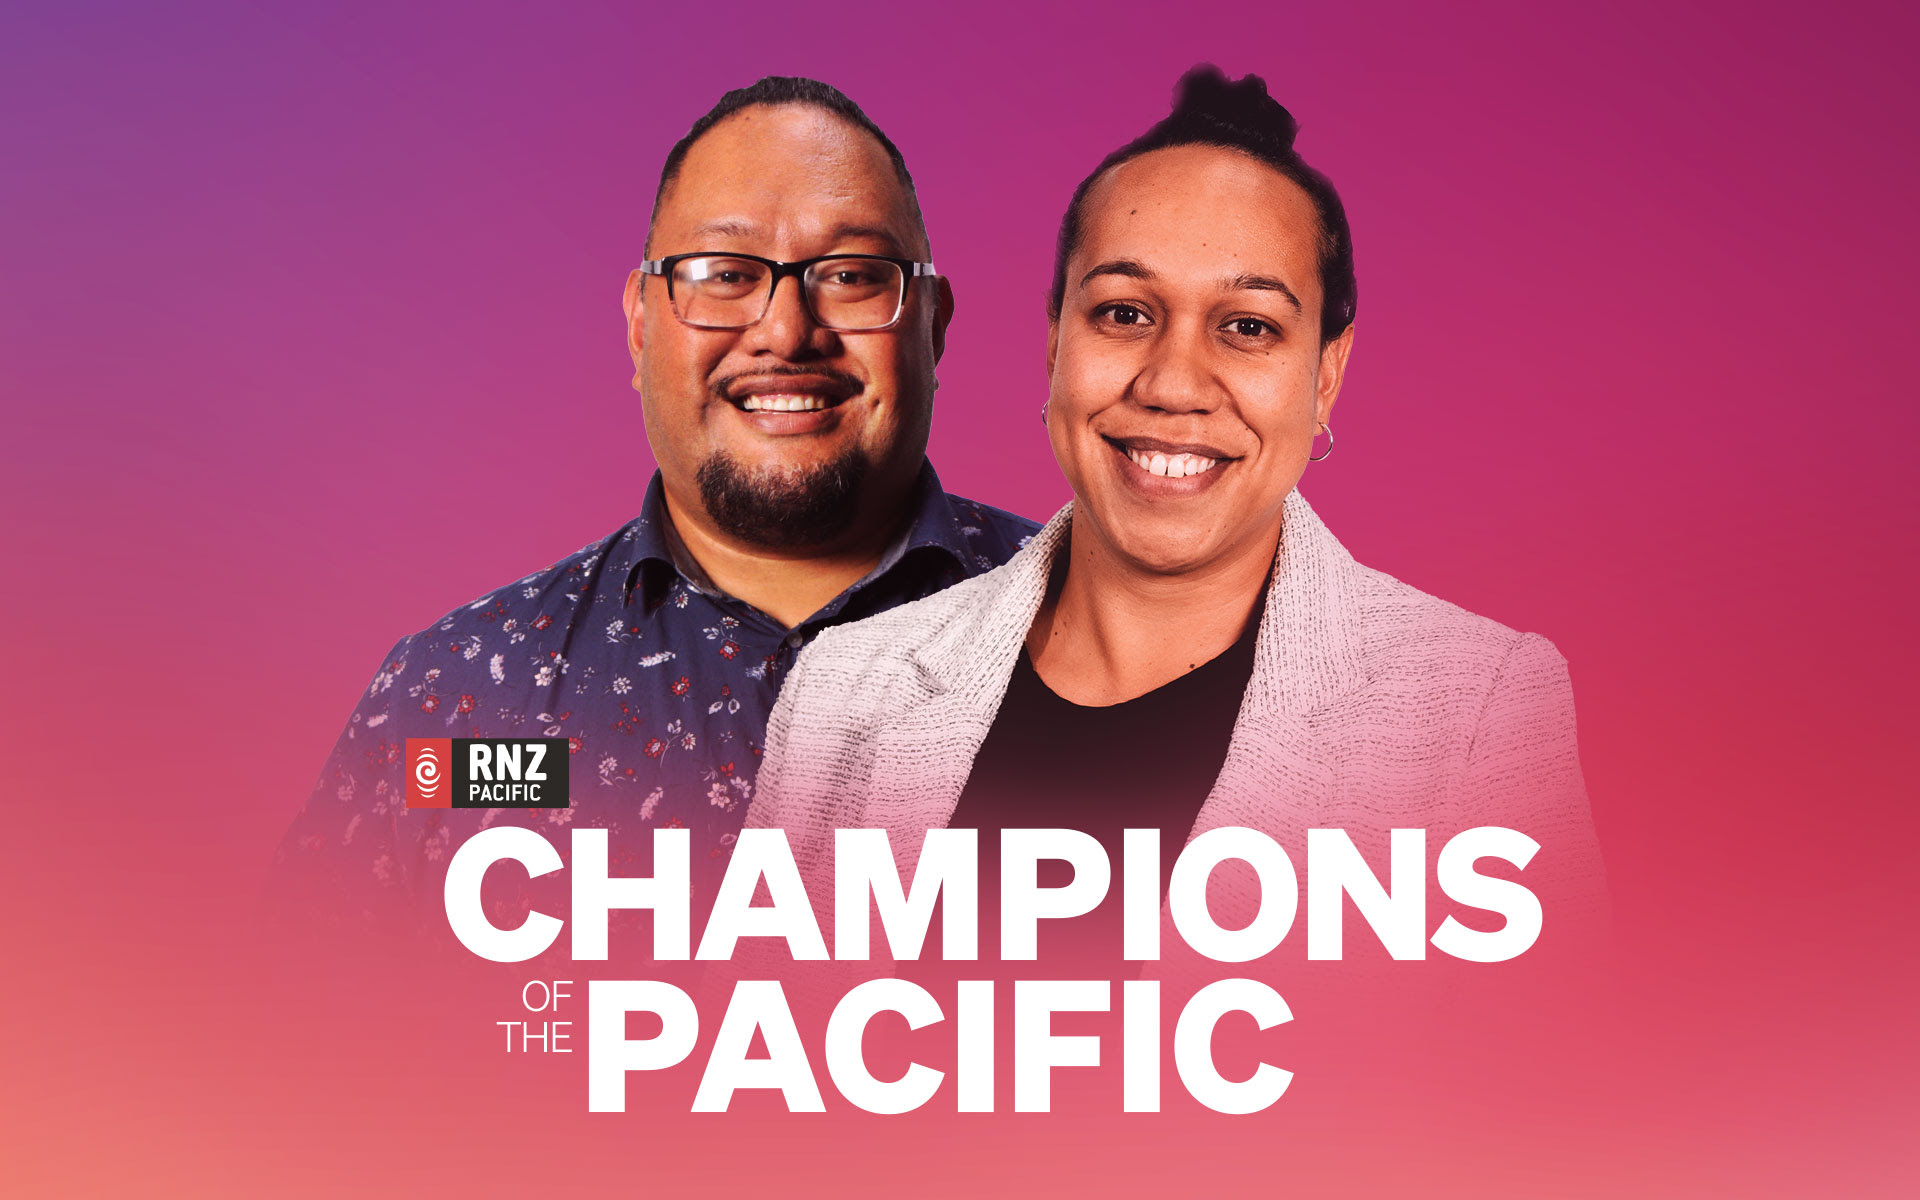 Koro Vaka'uta and Talei Anderson to host new RNZ Pacific sports show, 'Champions of the Pacific'